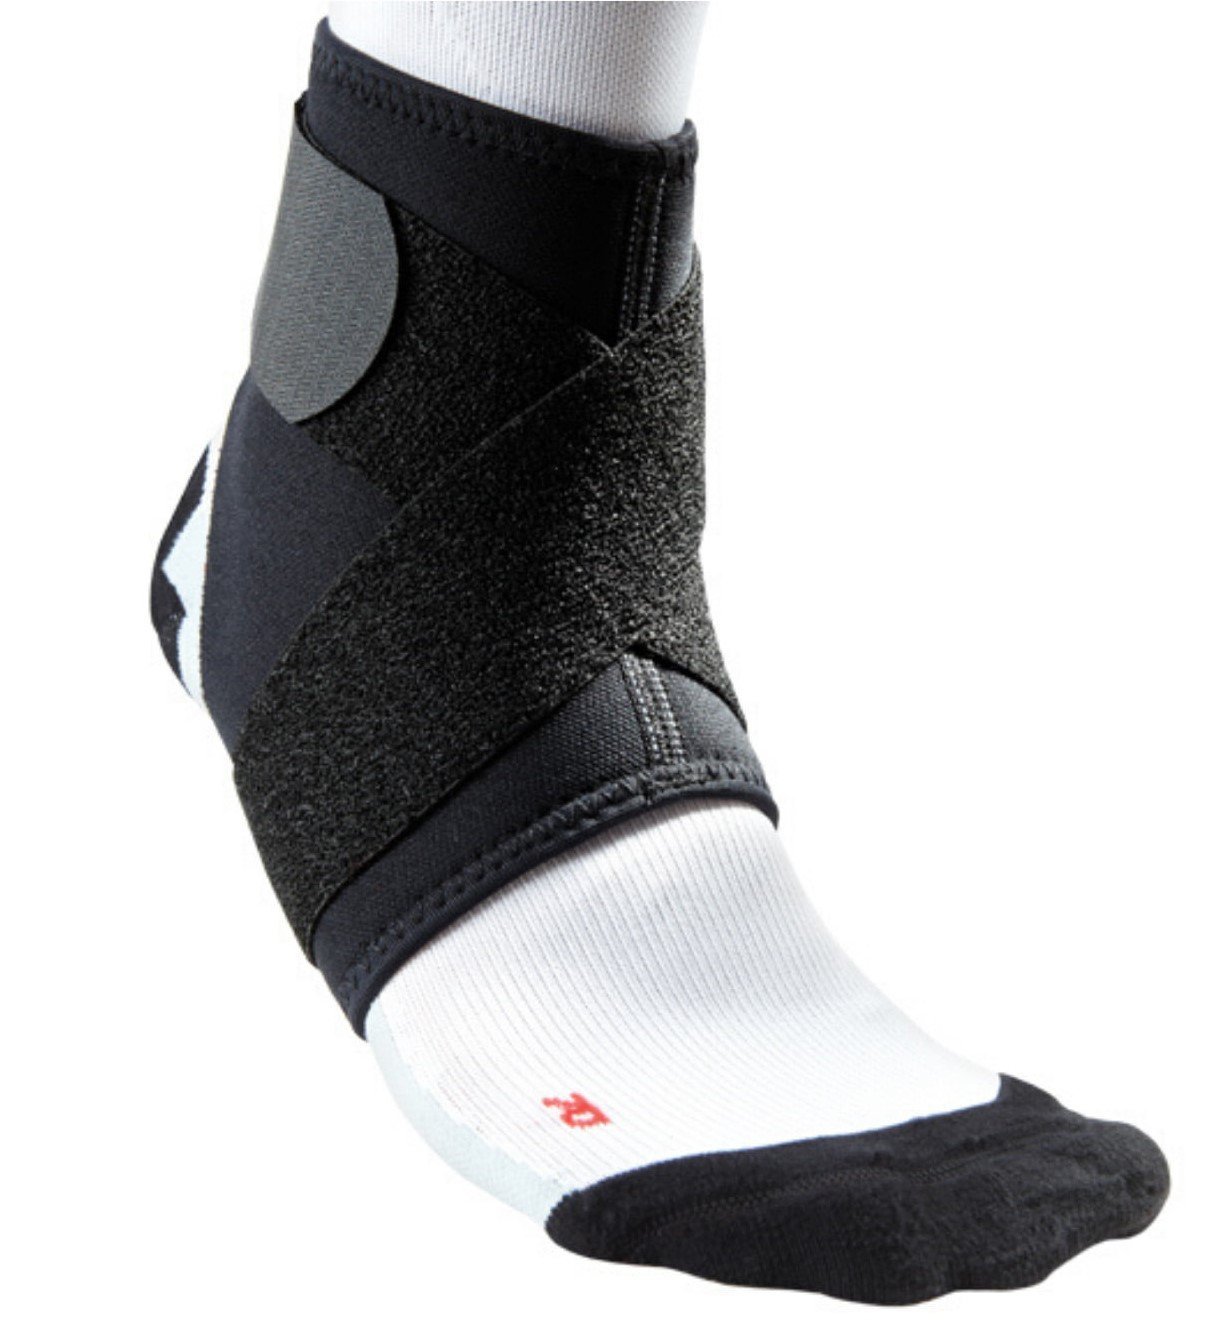 McDavid 432 Ankle Support w/Figure-8 Straps